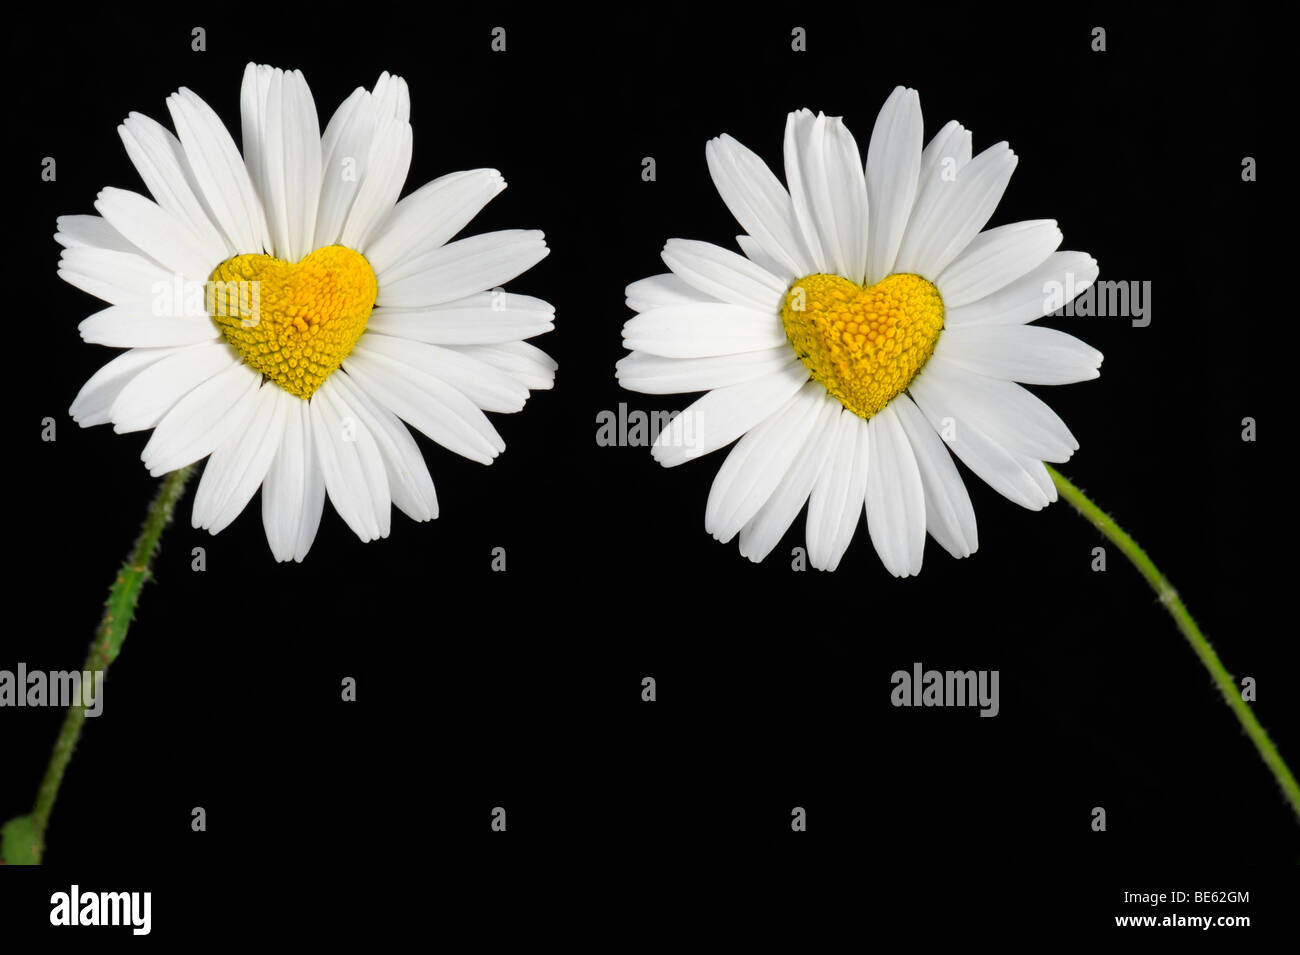 Daisies (Leucanthemum) with disc flowers in heart shape Stock Photo